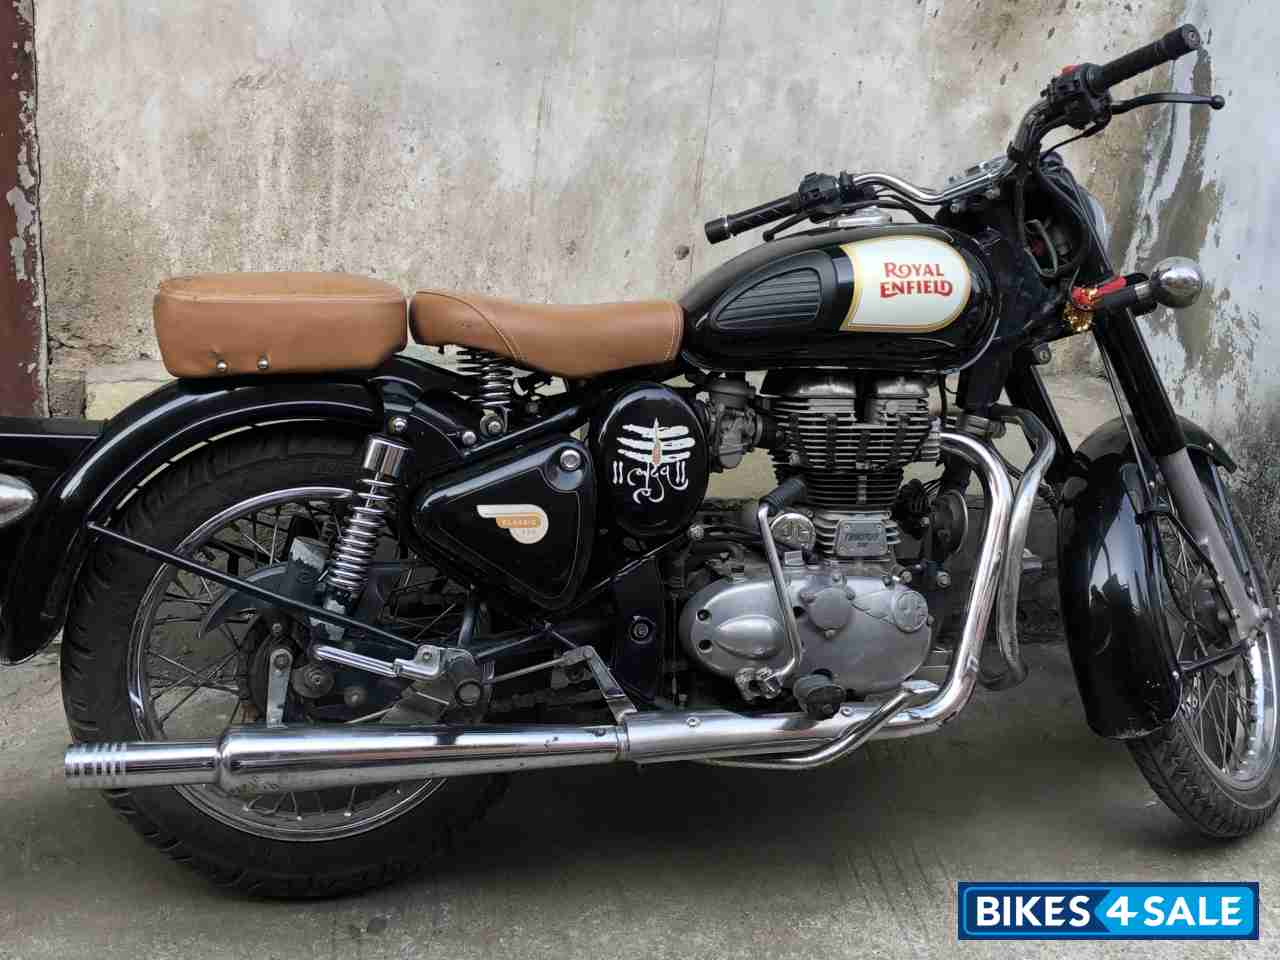 Used 2016 model Royal Enfield Classic 350 for sale in Ahmedabad. ID ...